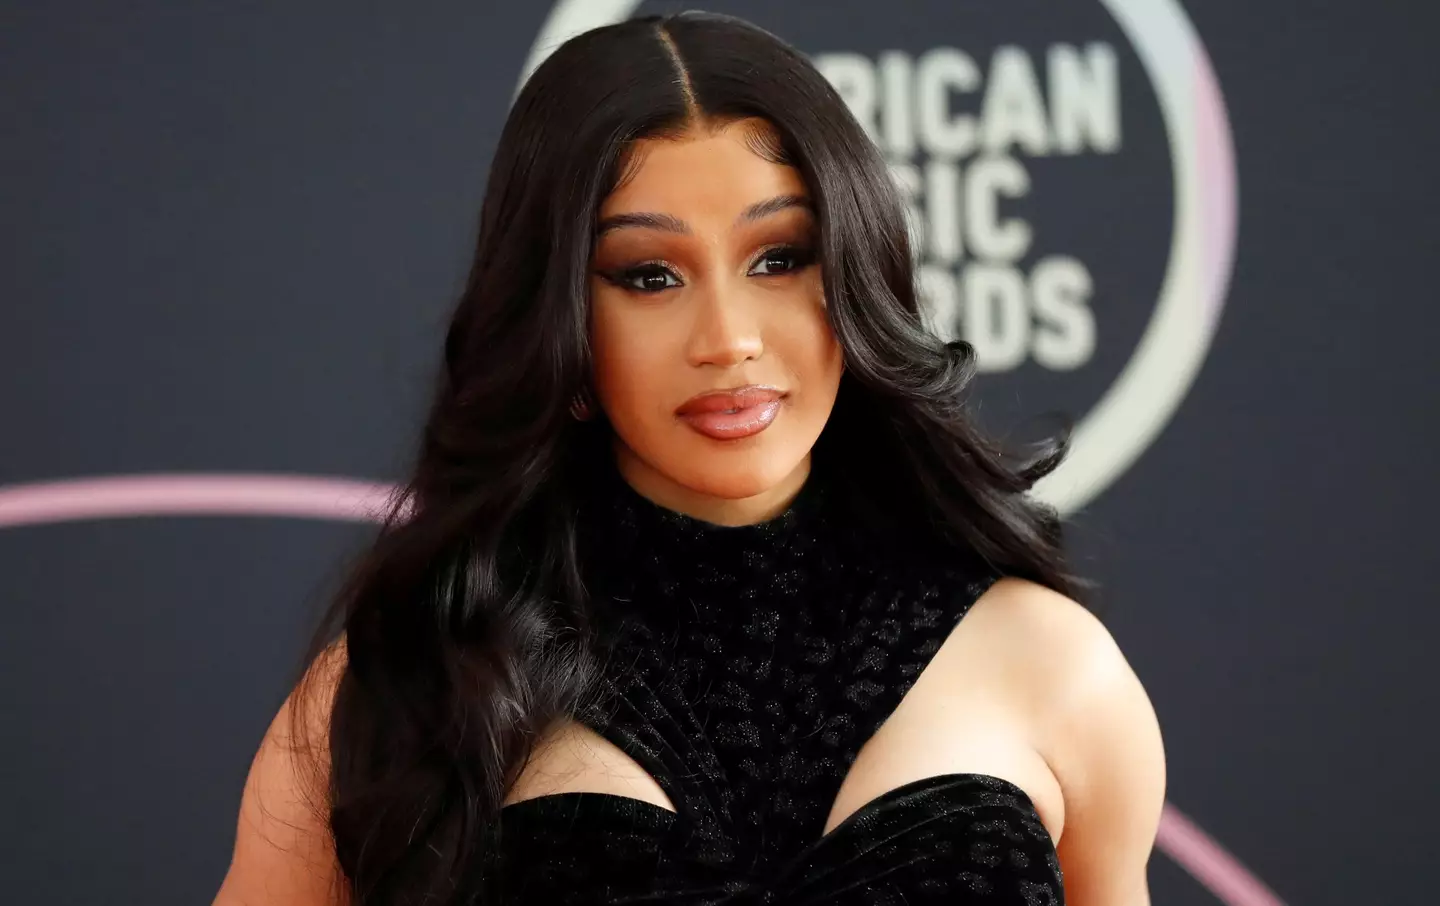 Cardi has said she is owning up to her past decisions.